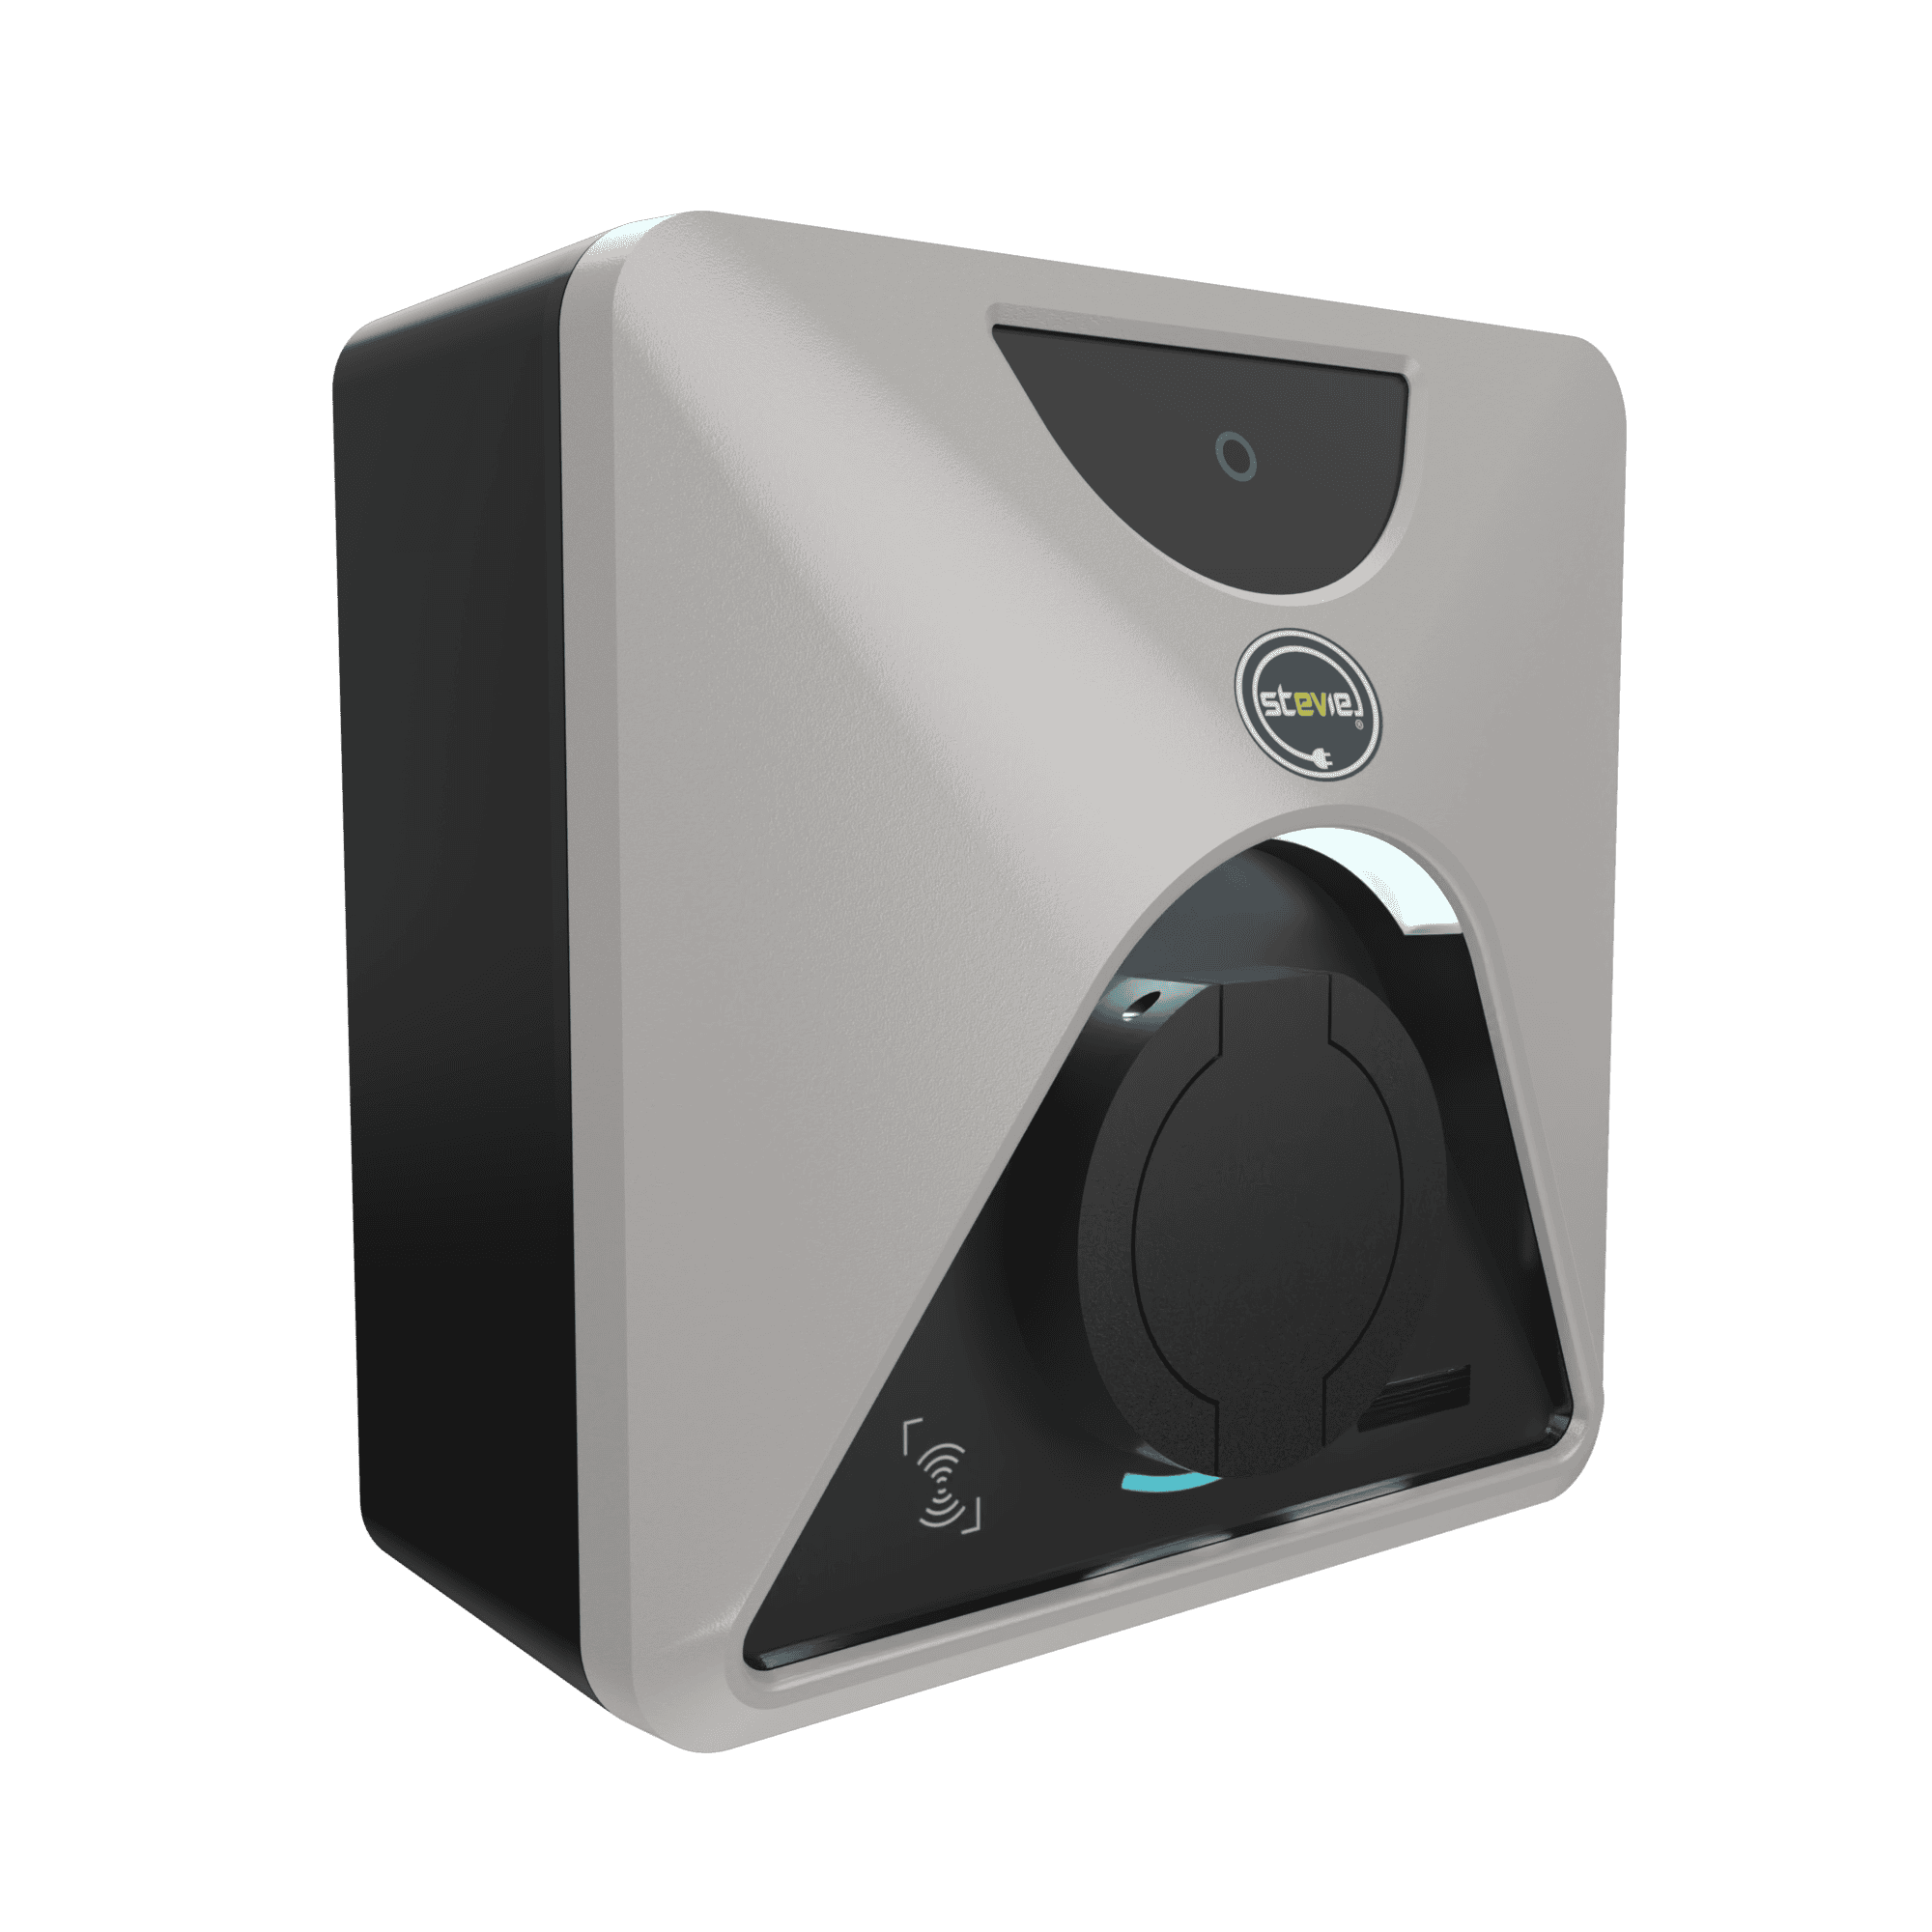 Stevie EV 7.4kW on-wall EV Charger (no display)